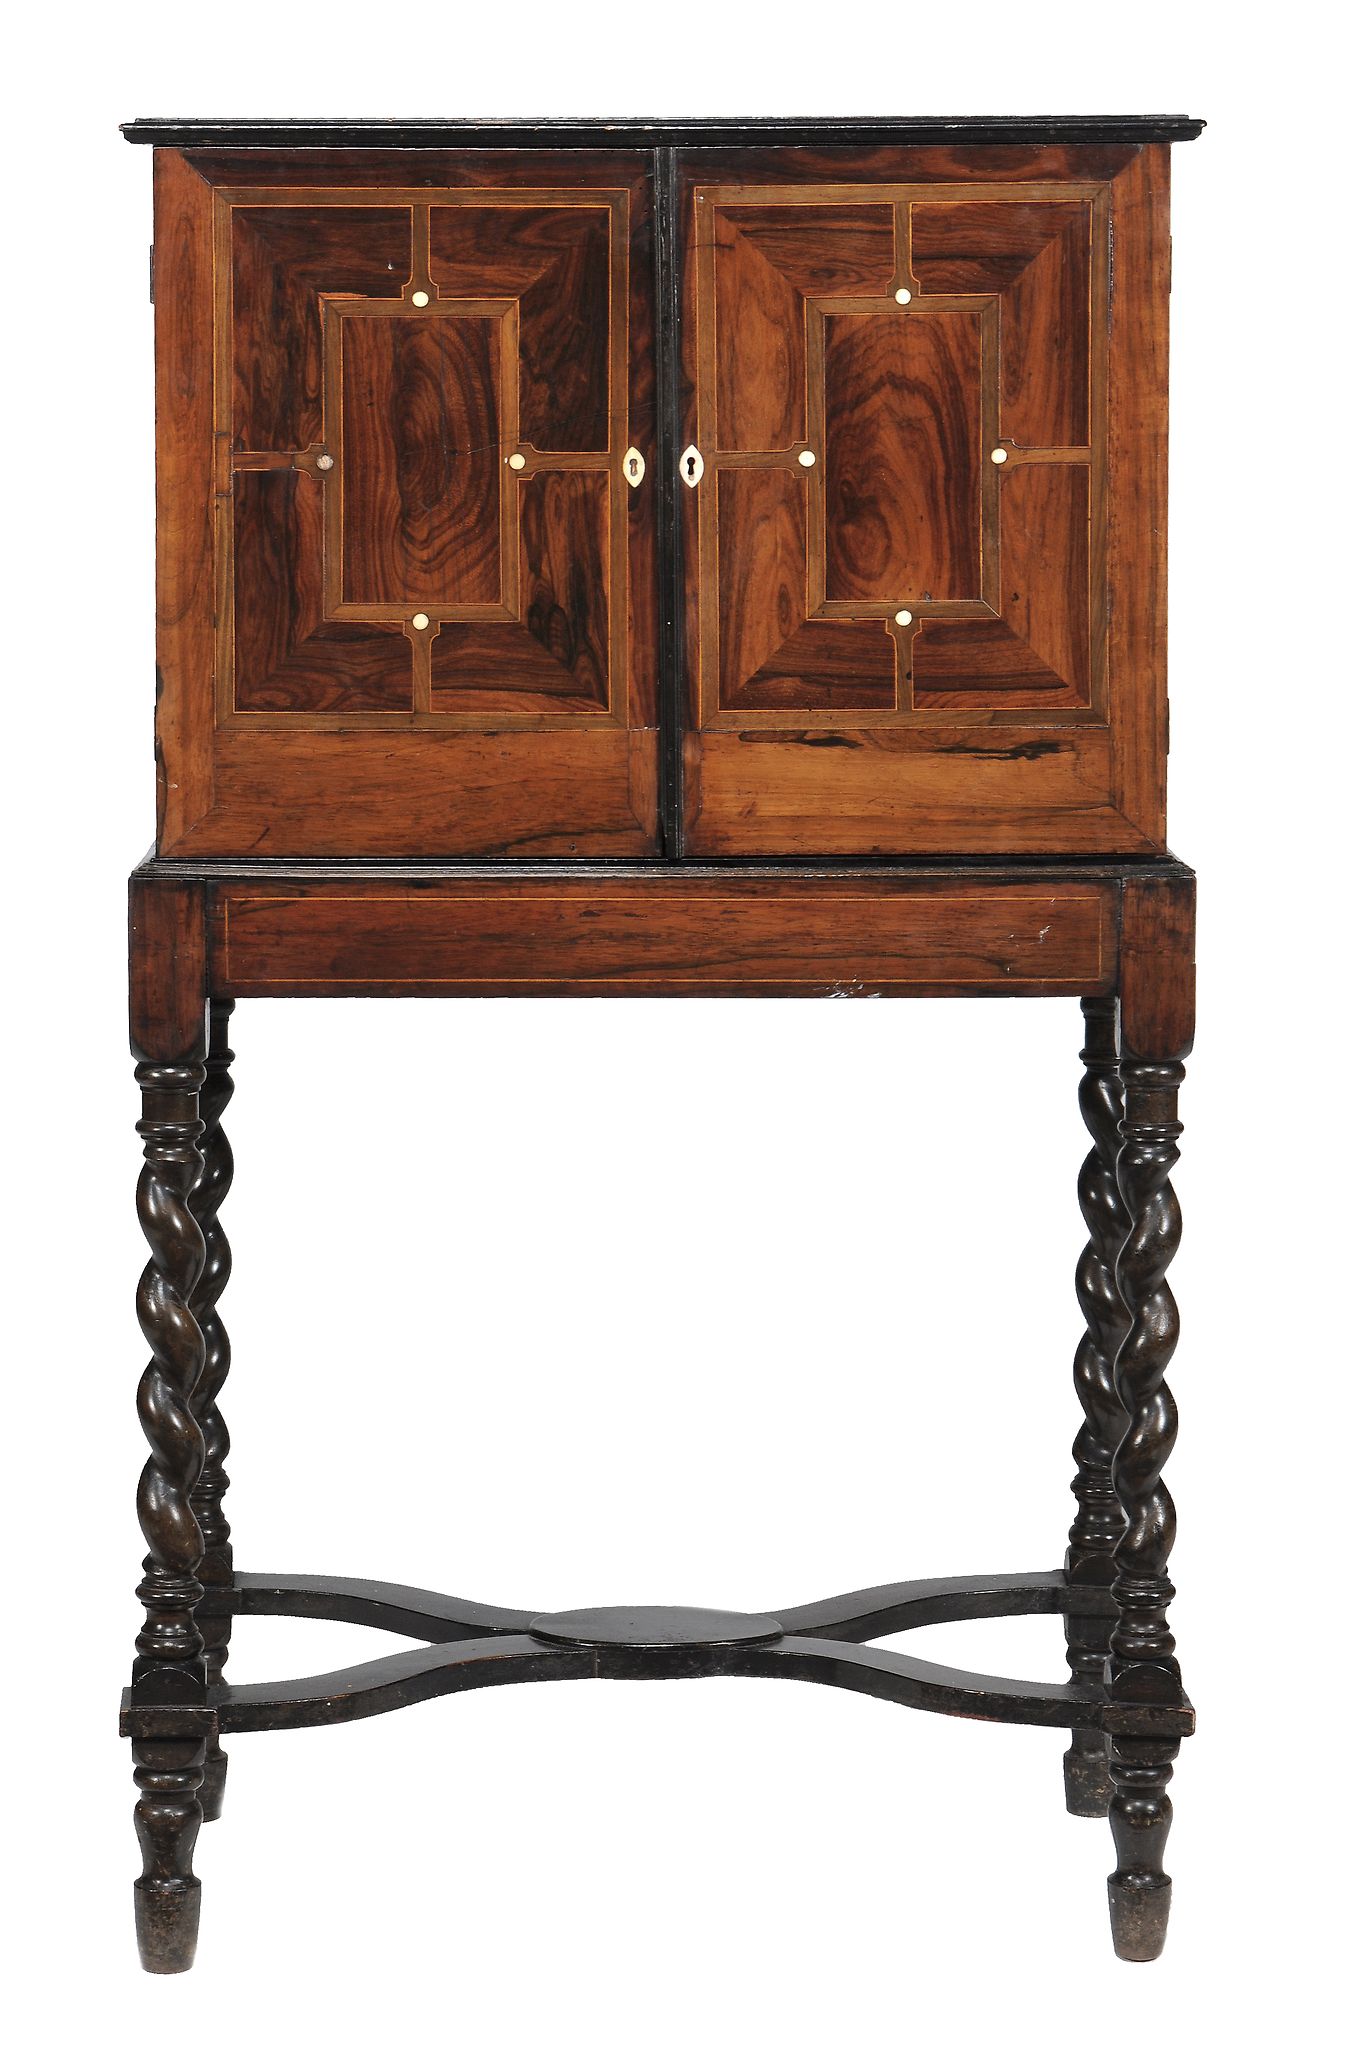 An Italian rosewood and simulated pietre dure collectors cabinet  , mid 17th century, with hinged